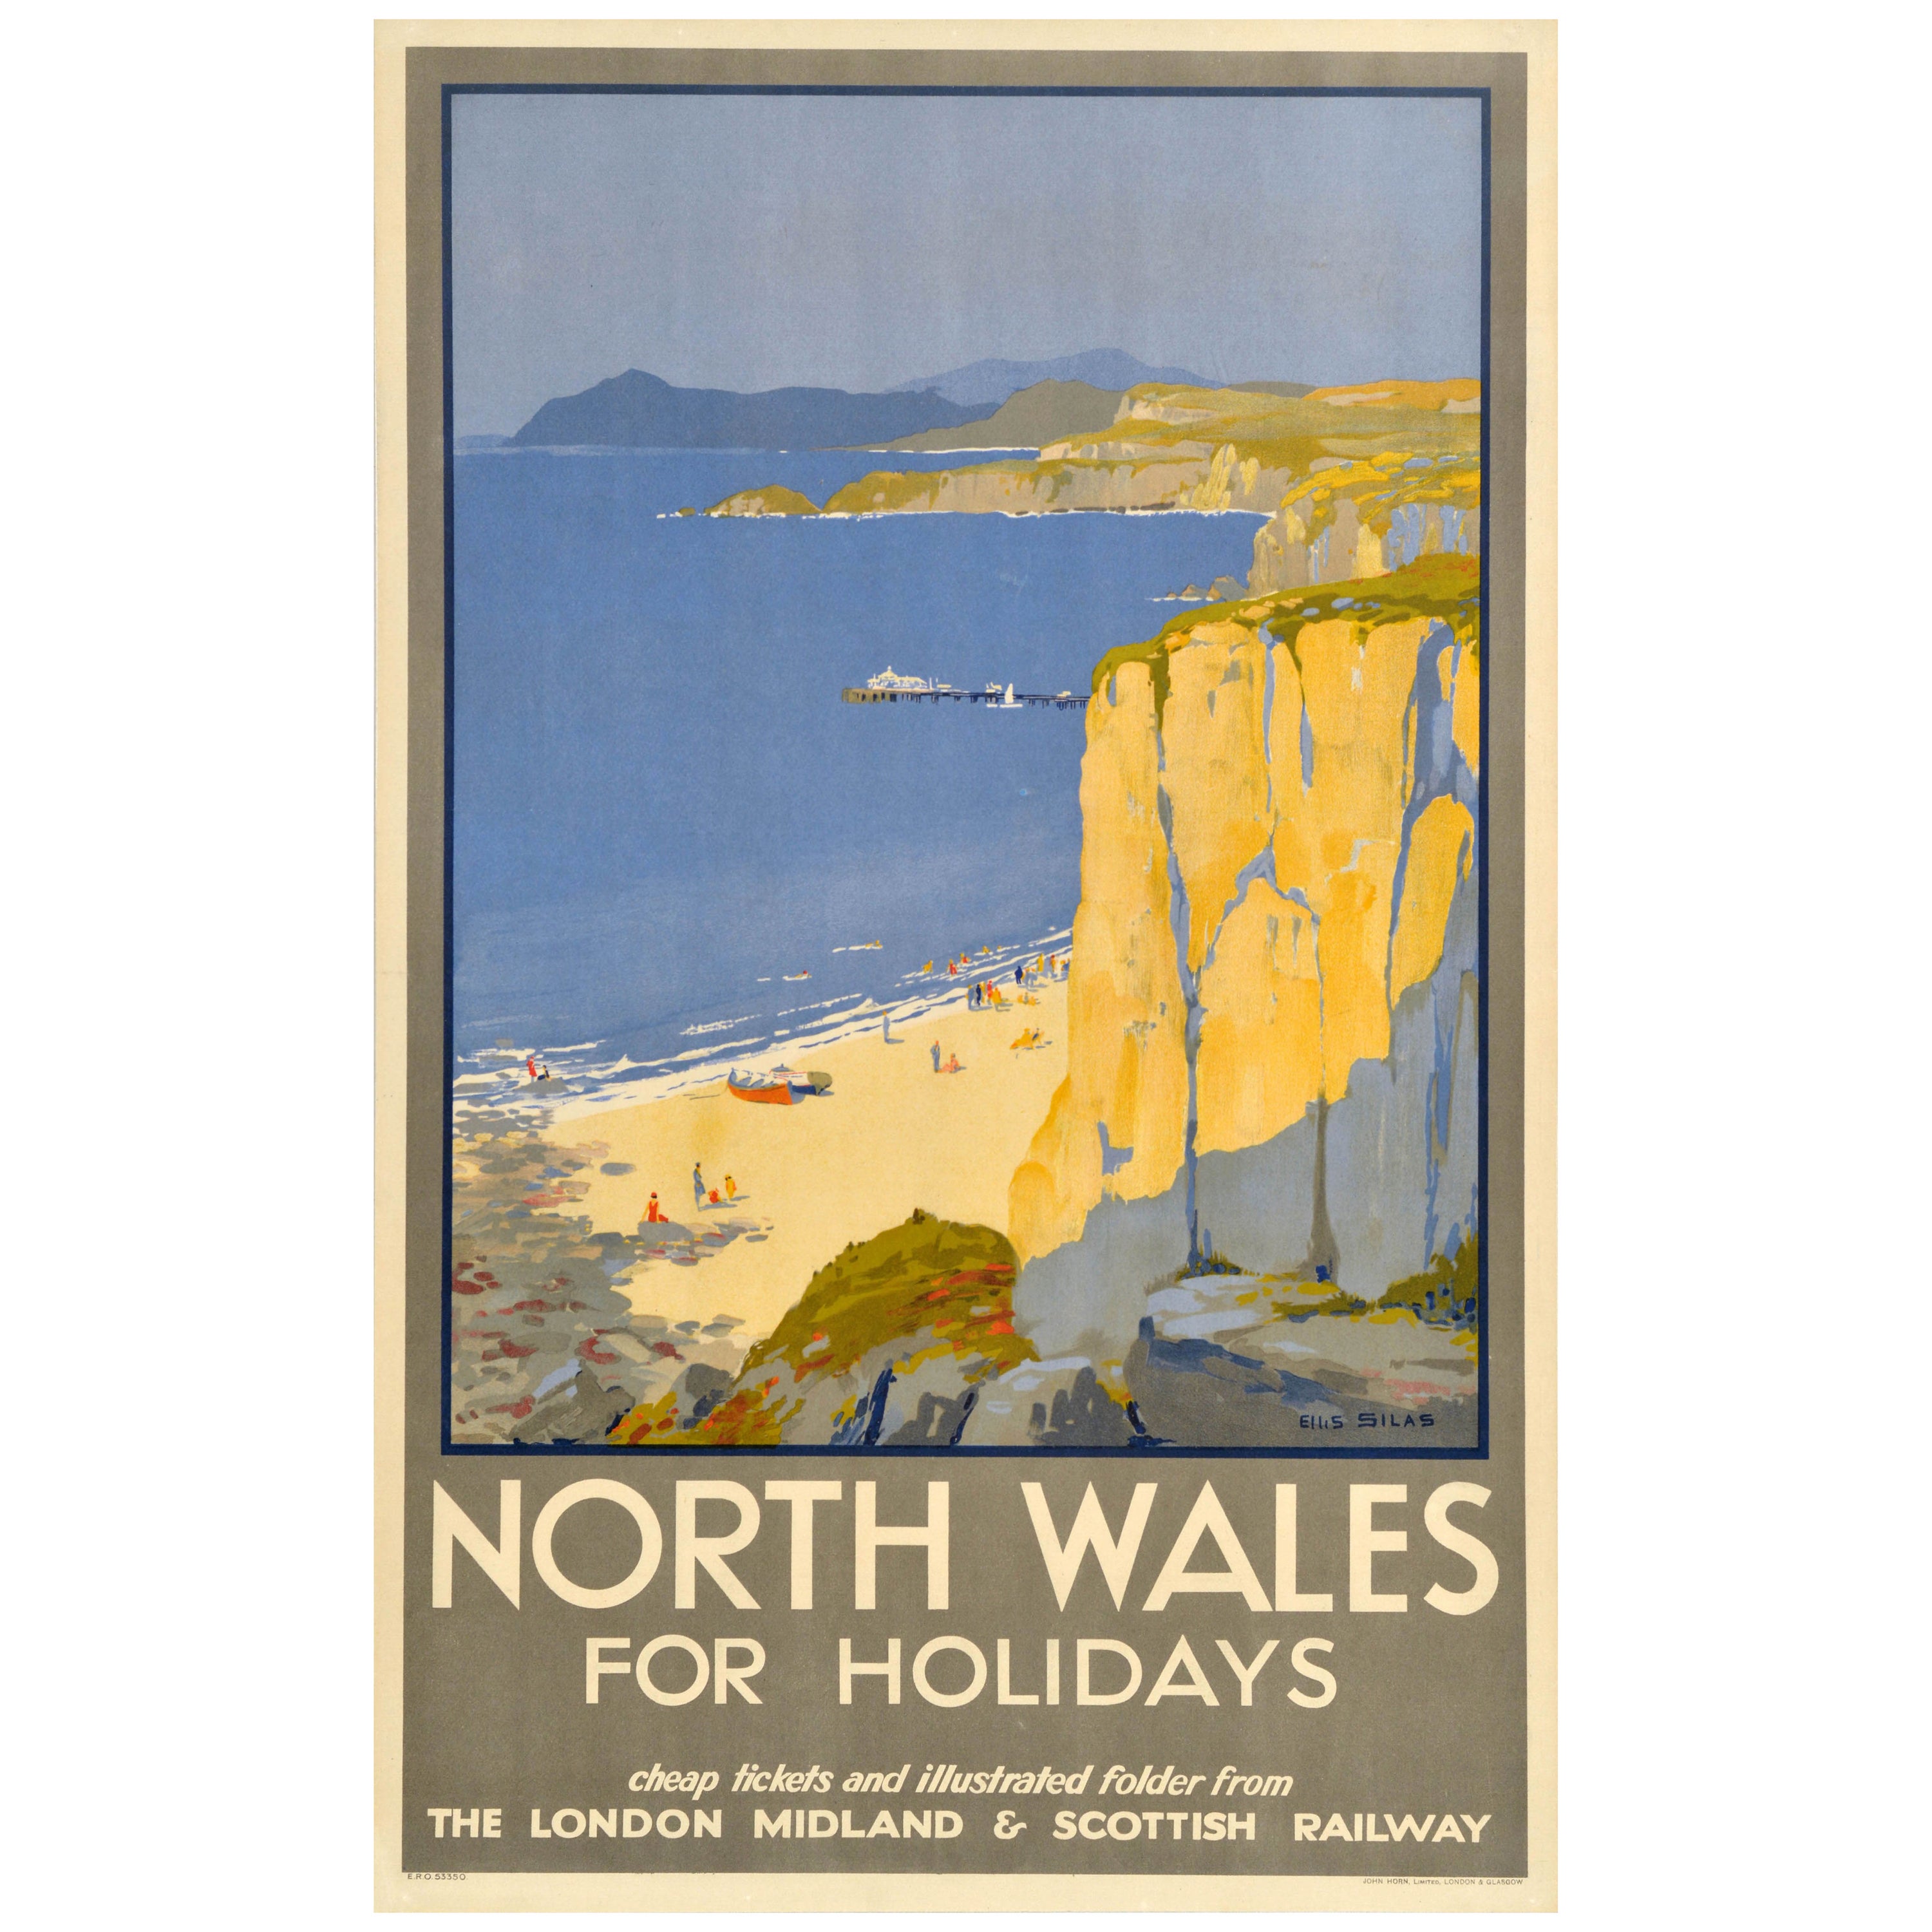 Original Vintage Train Travel Poster North Wales For Holidays LMS Railway Coast For Sale